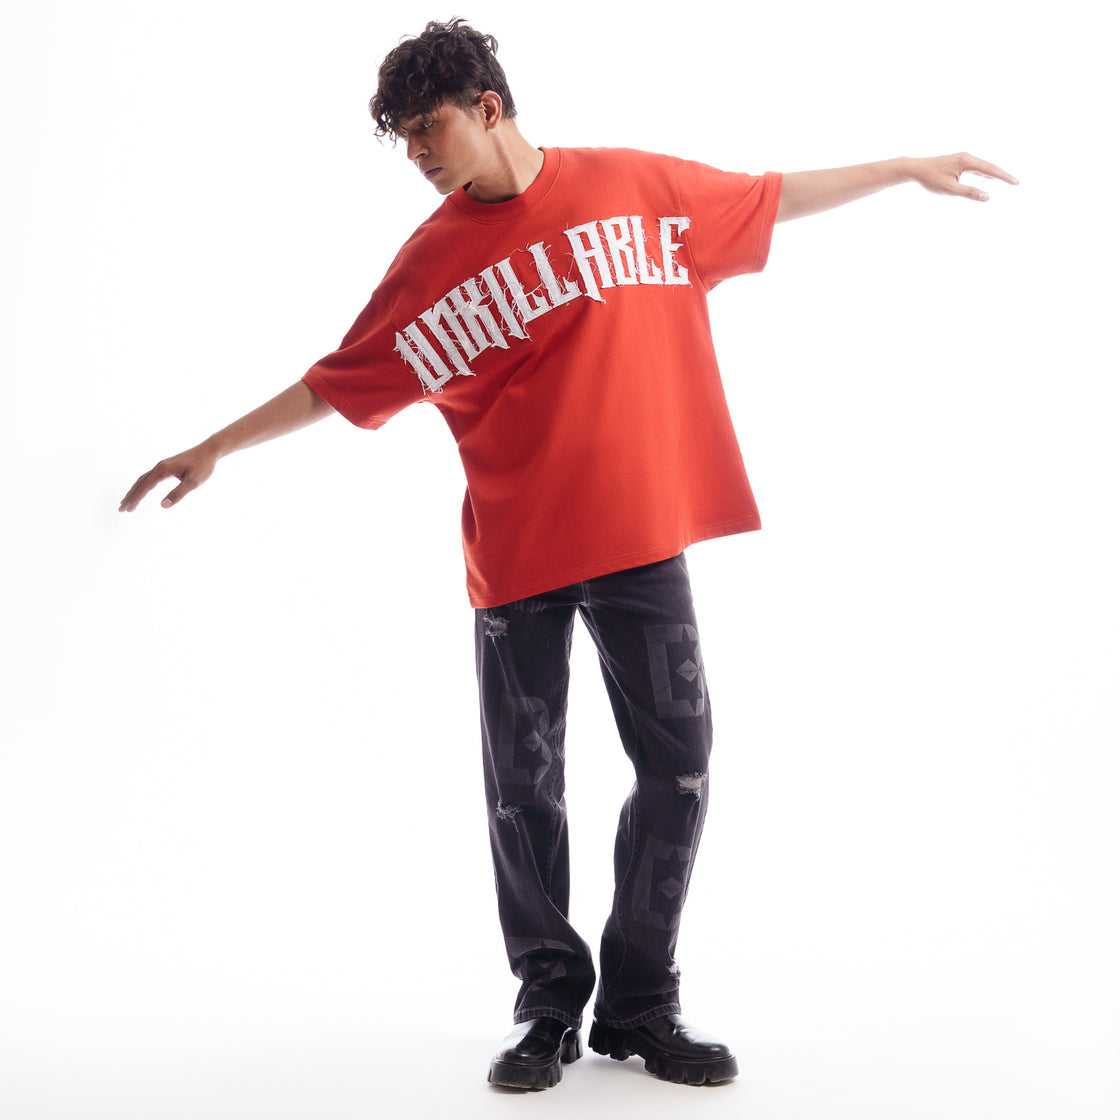 Unkillable Brick Red T-shirt